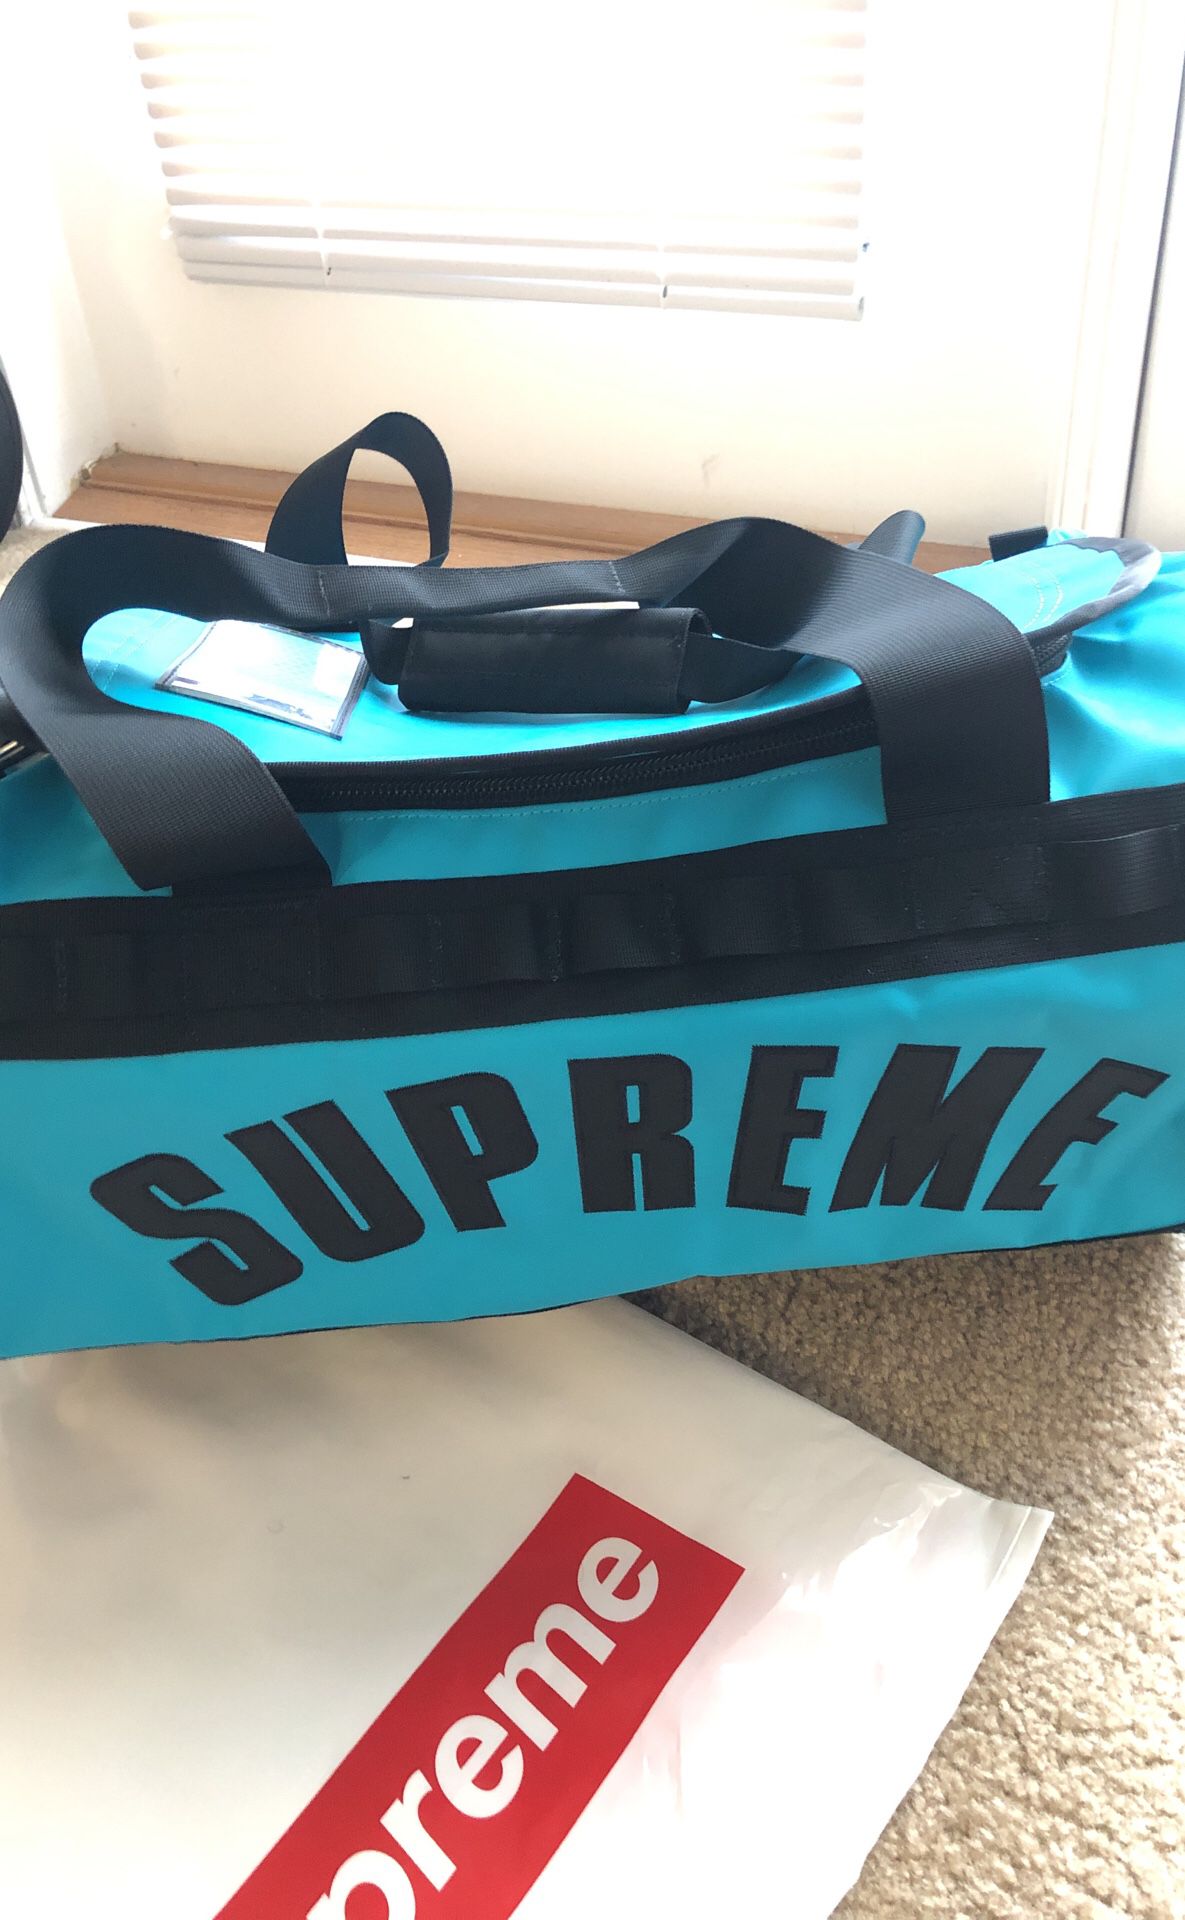 Supreme x The North Face duffle bag